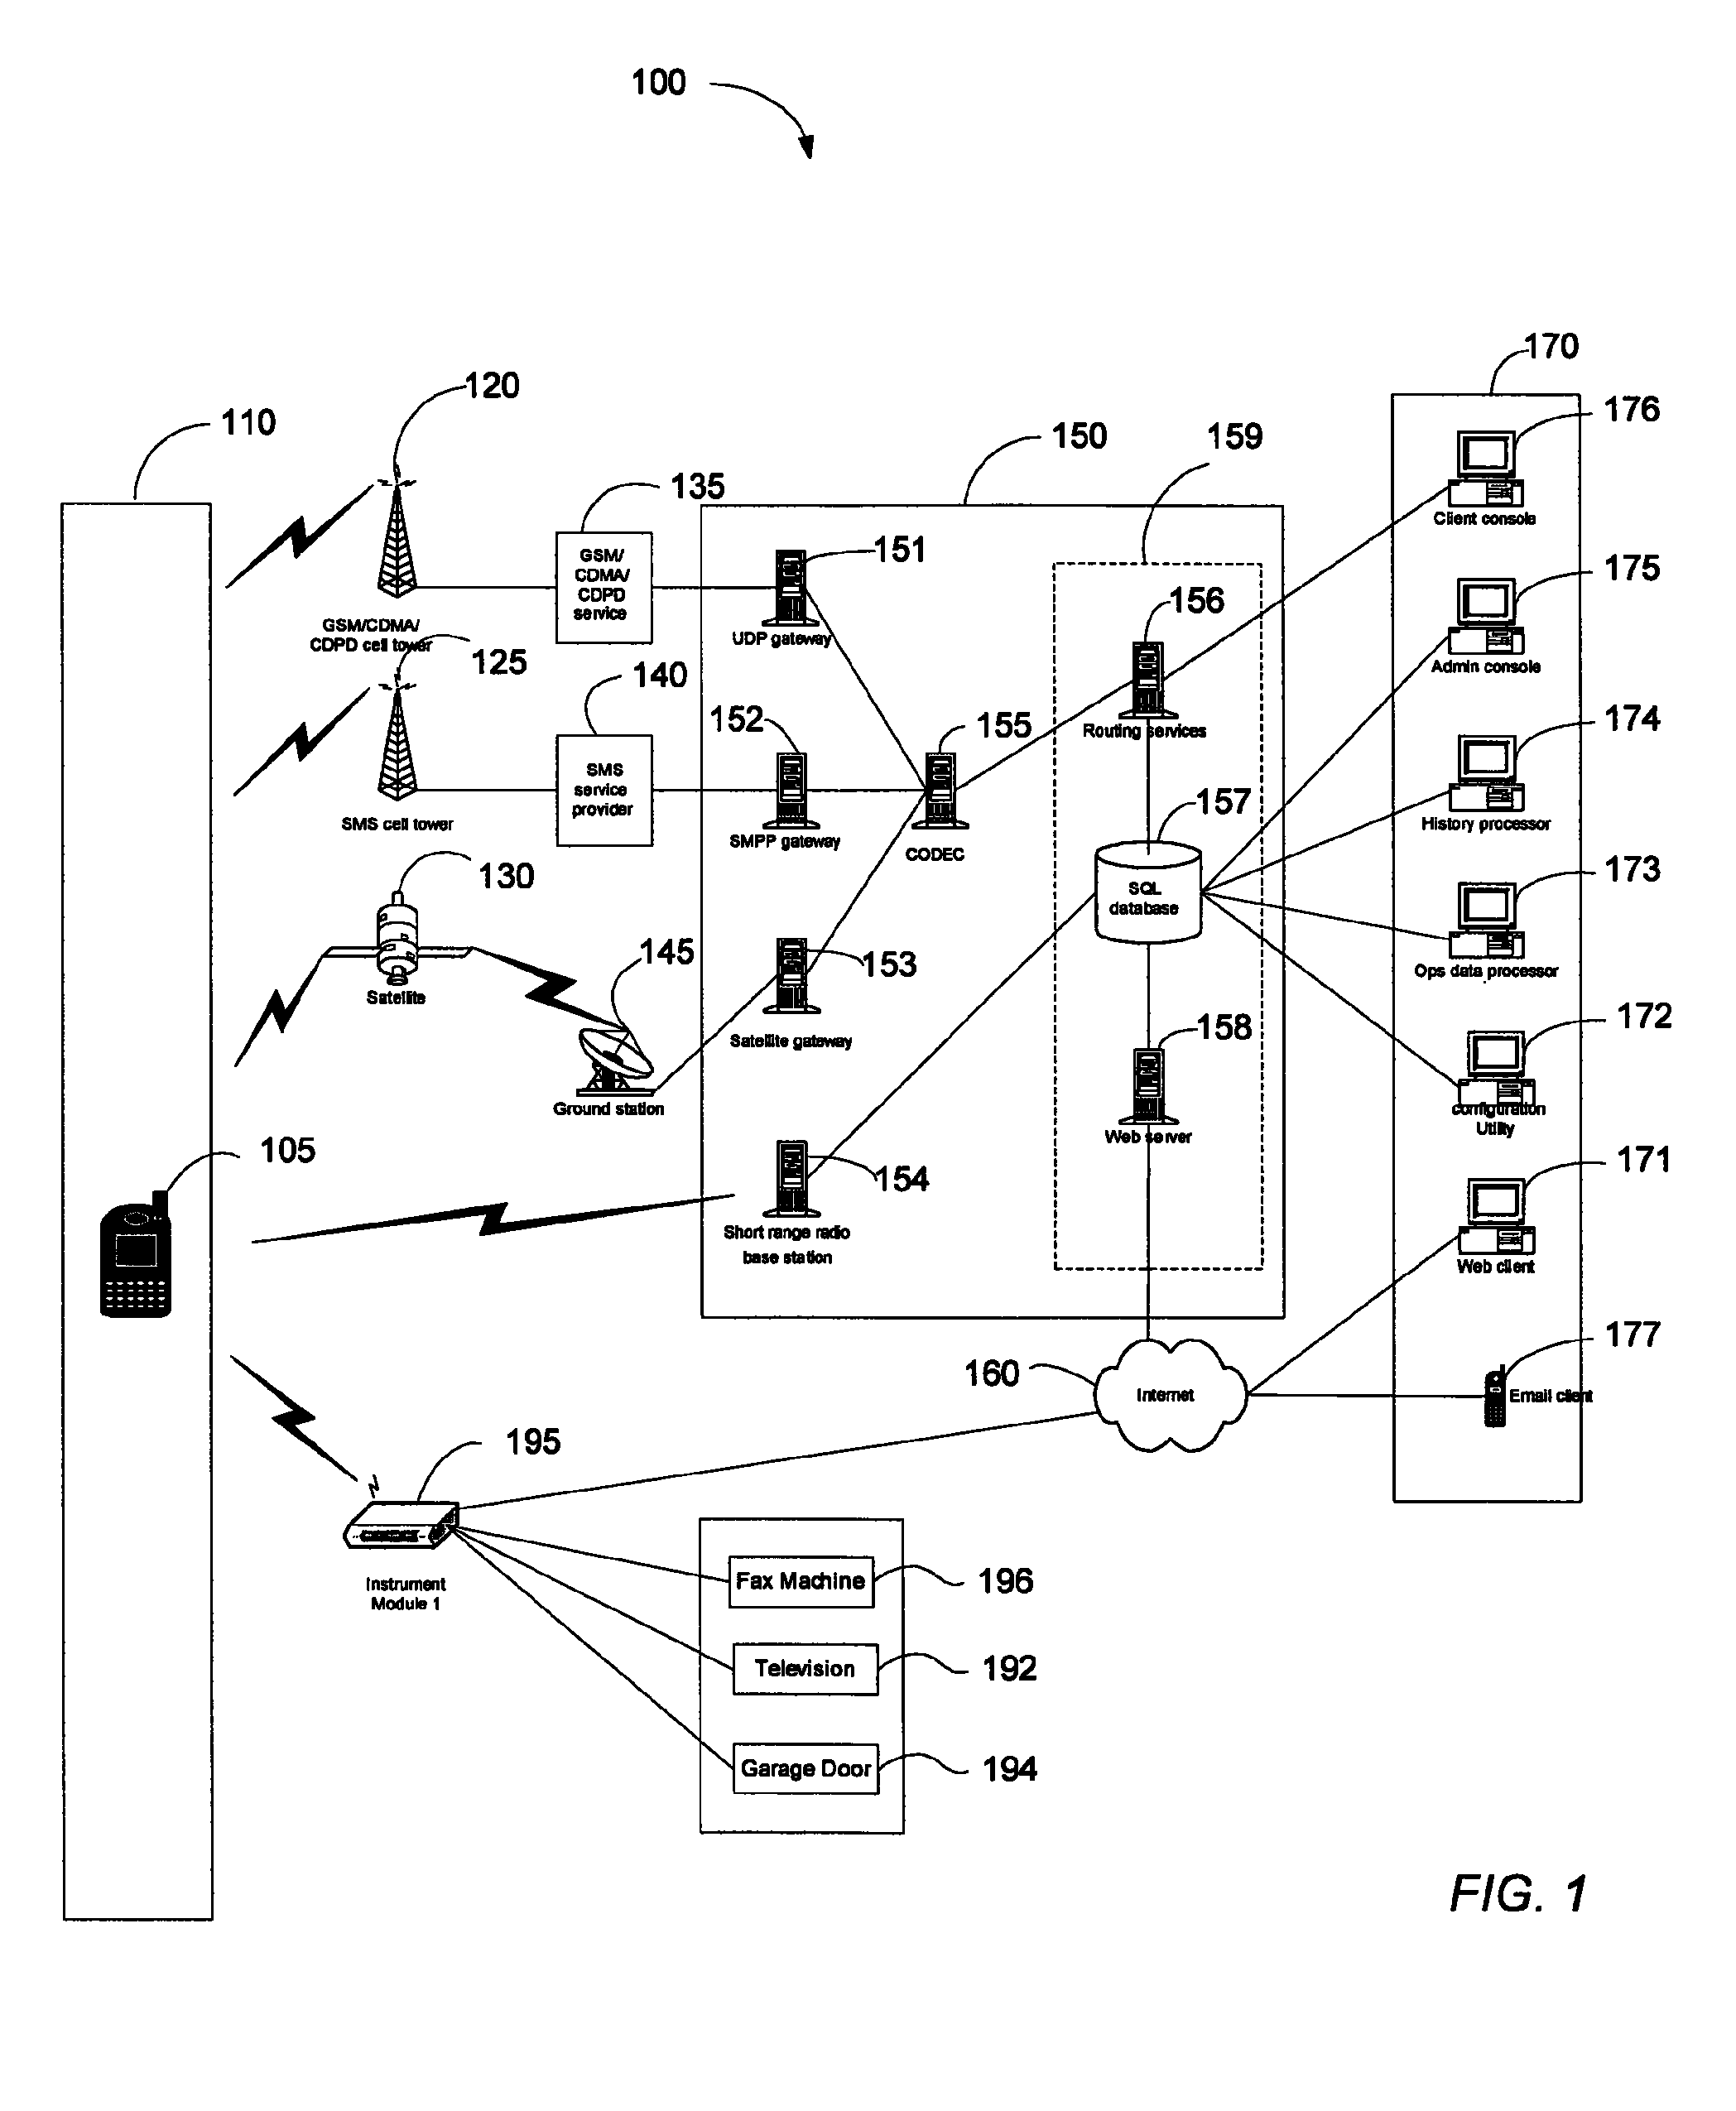 Method and system to monitor and control devices utilizing wireless media